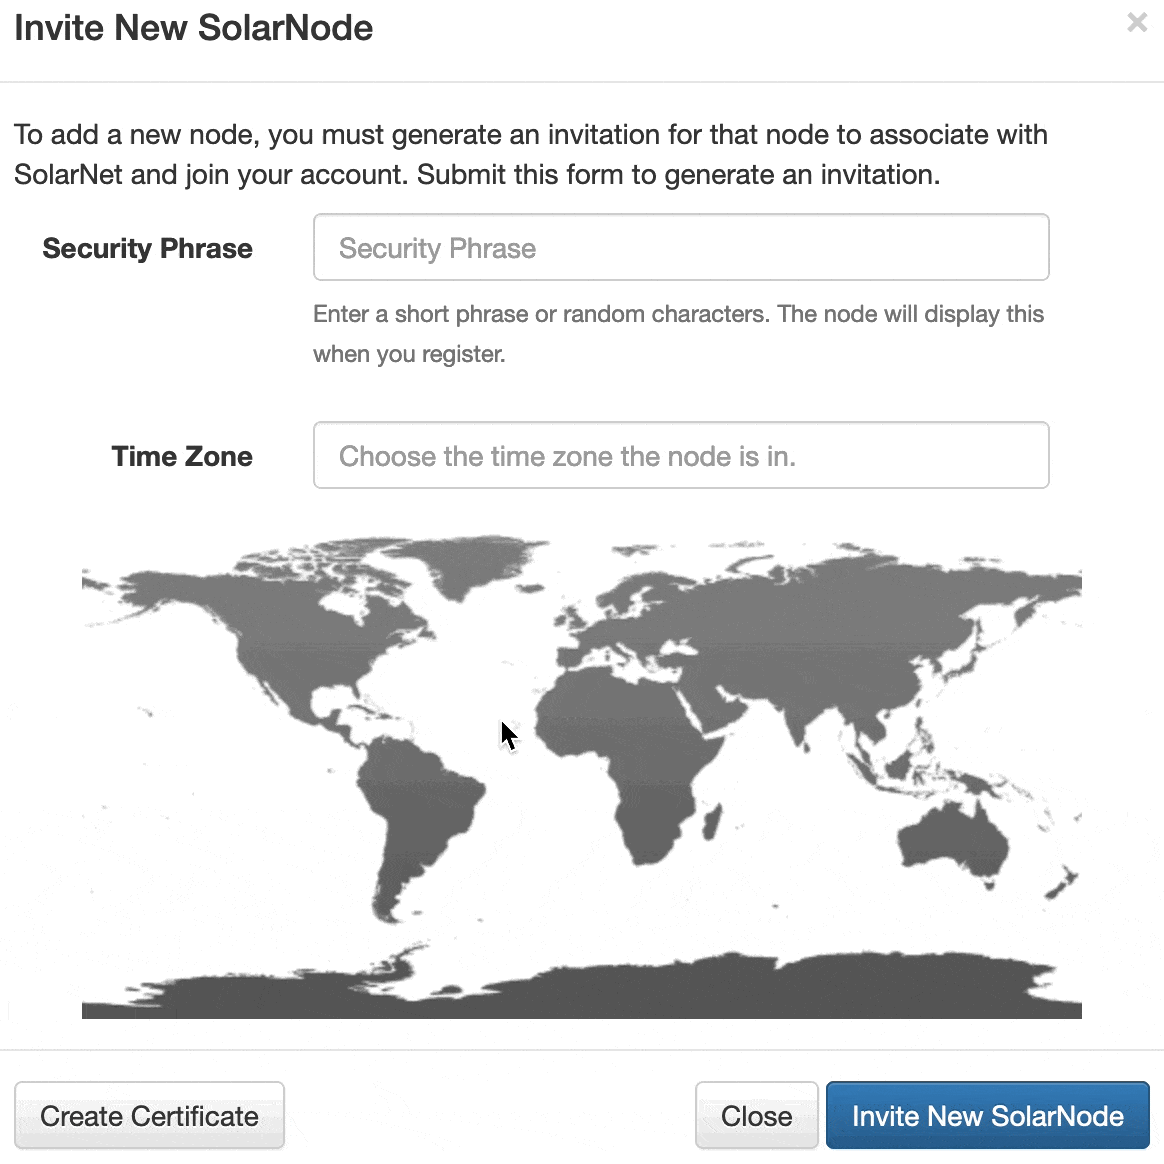 Choose node time zone on world map